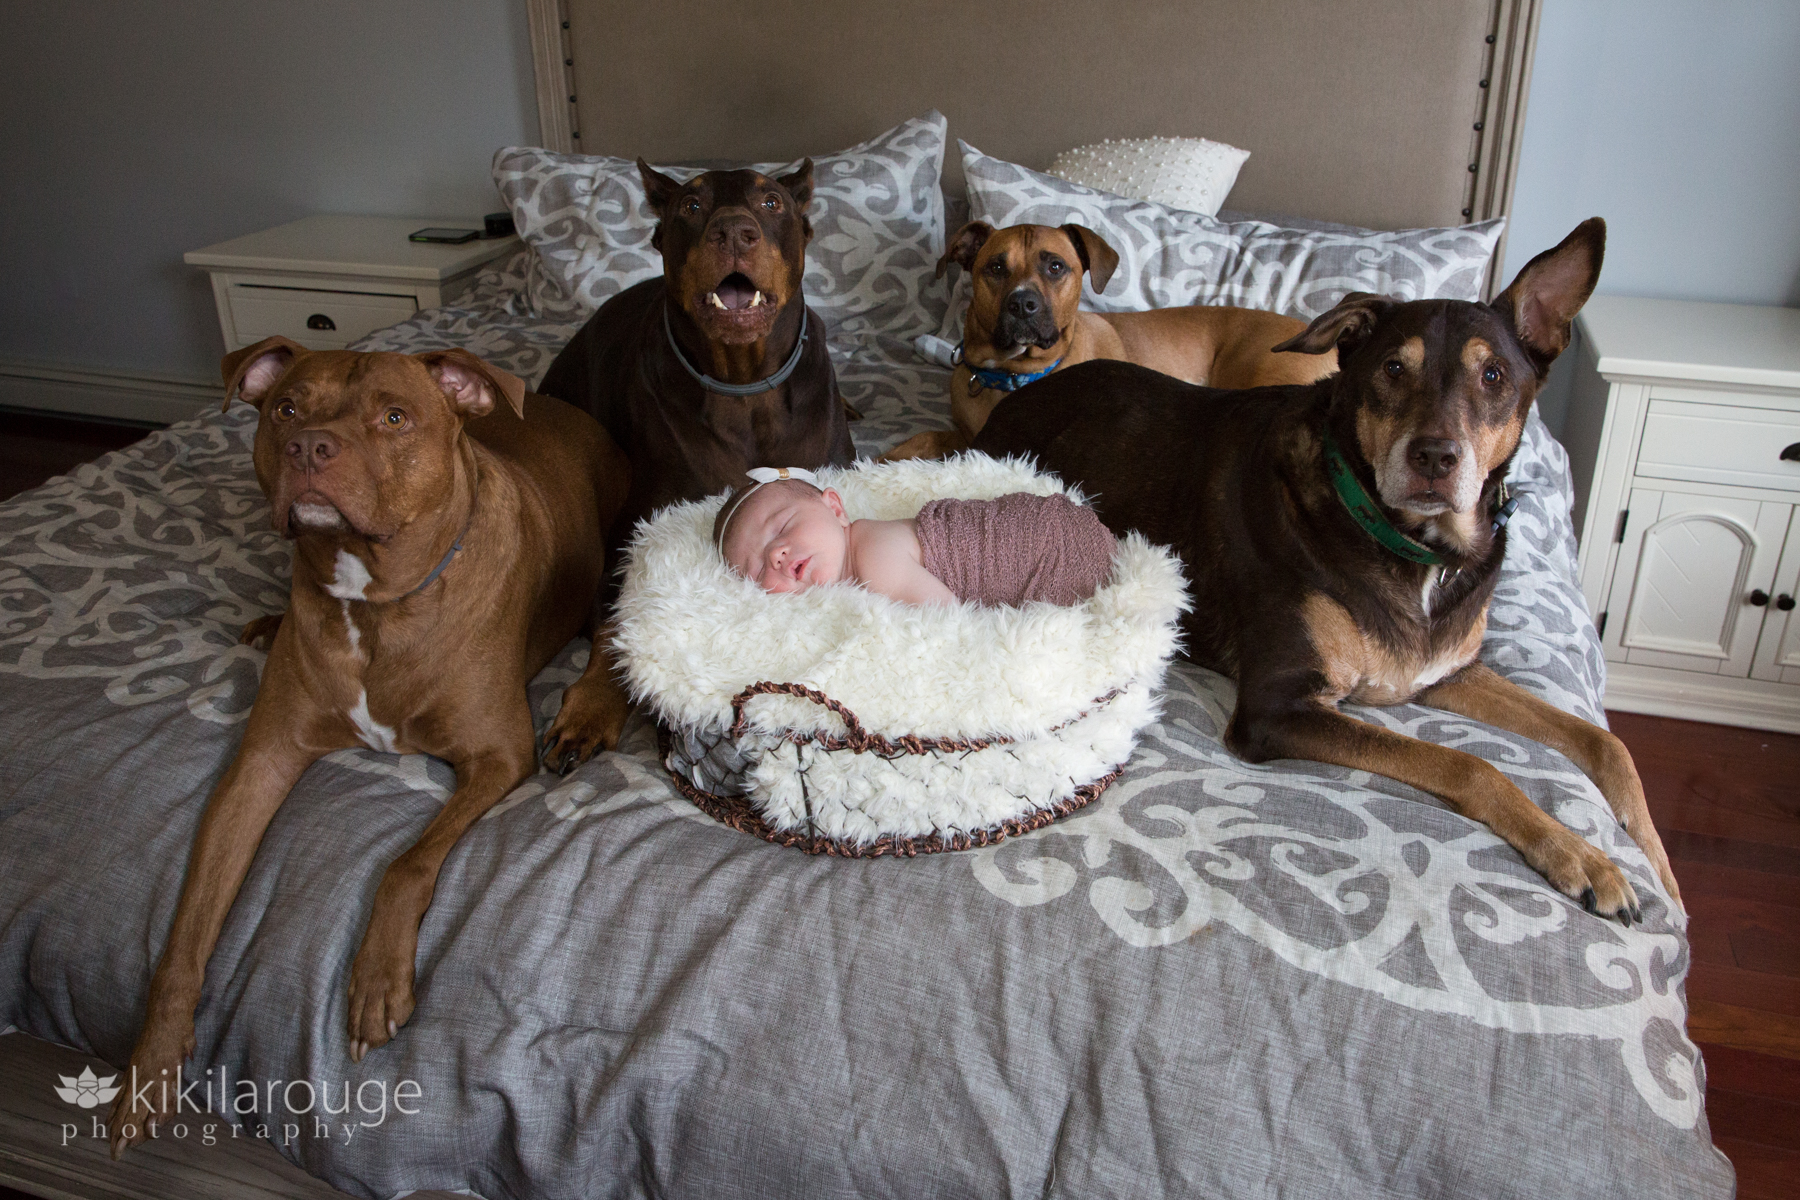 Four dogs around a sleeping newborn baby on large grey bed